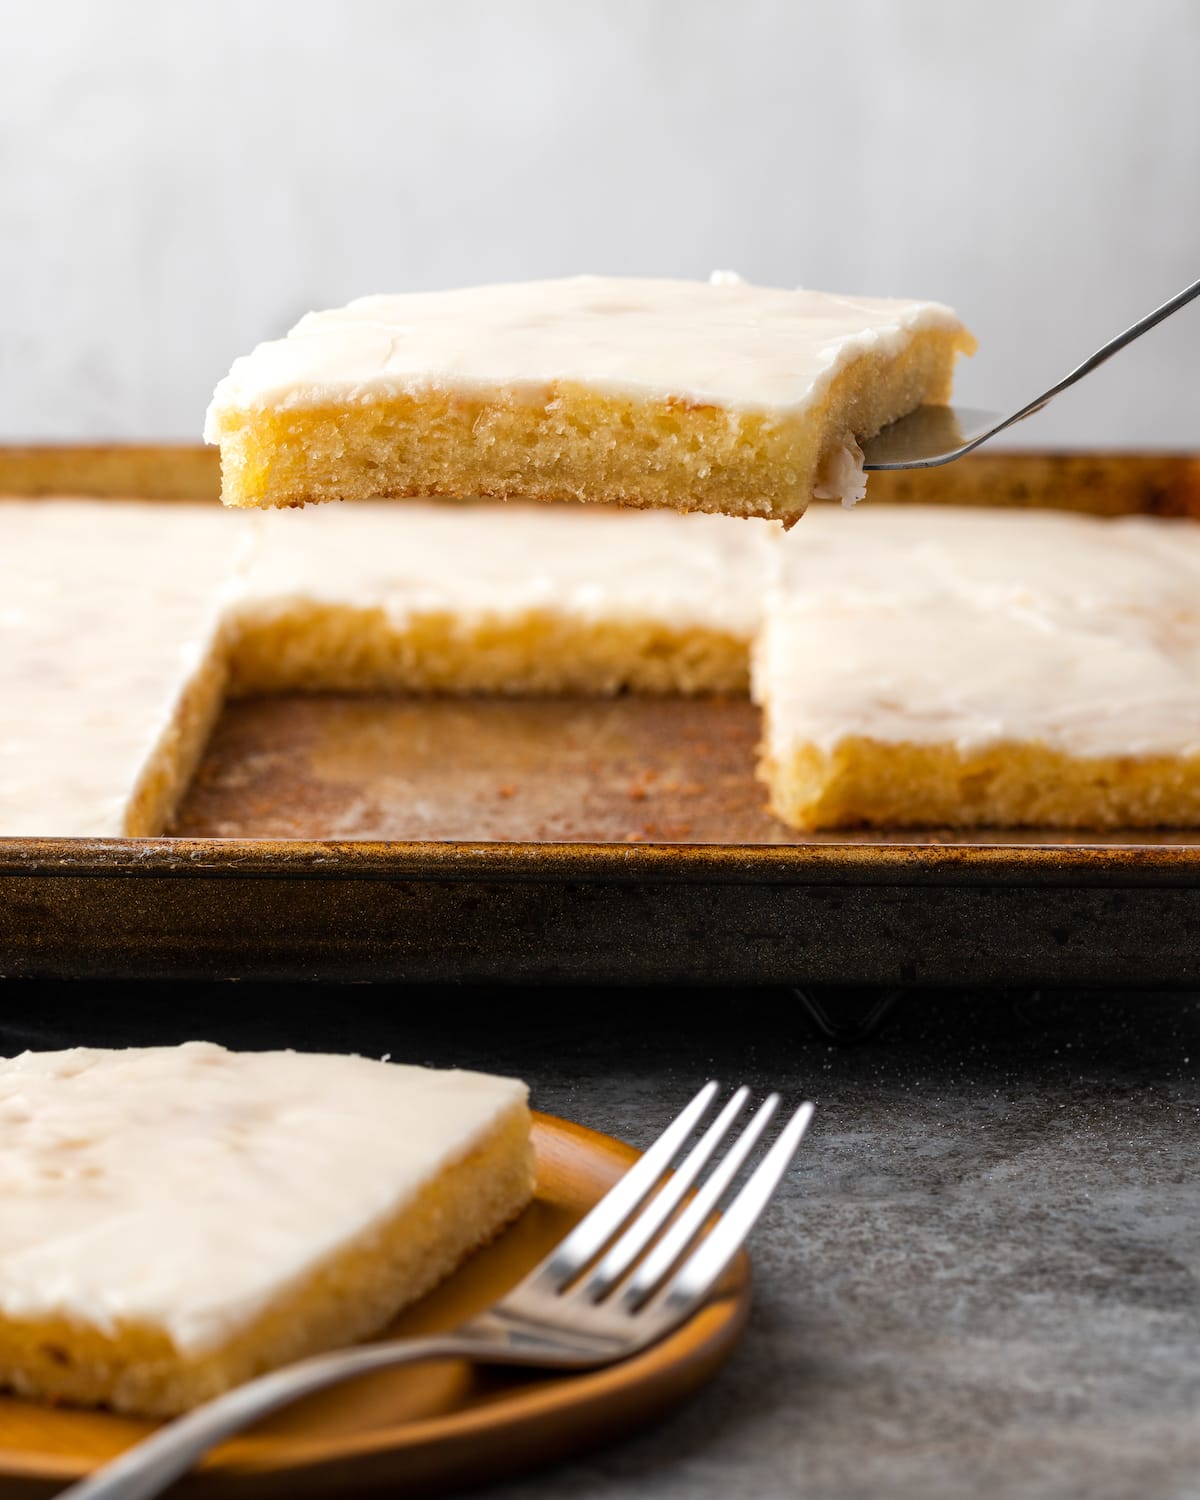 A slice of buttermilk sheet cake is lifted from a pan, next to a slice of cake on a plate with a fork.